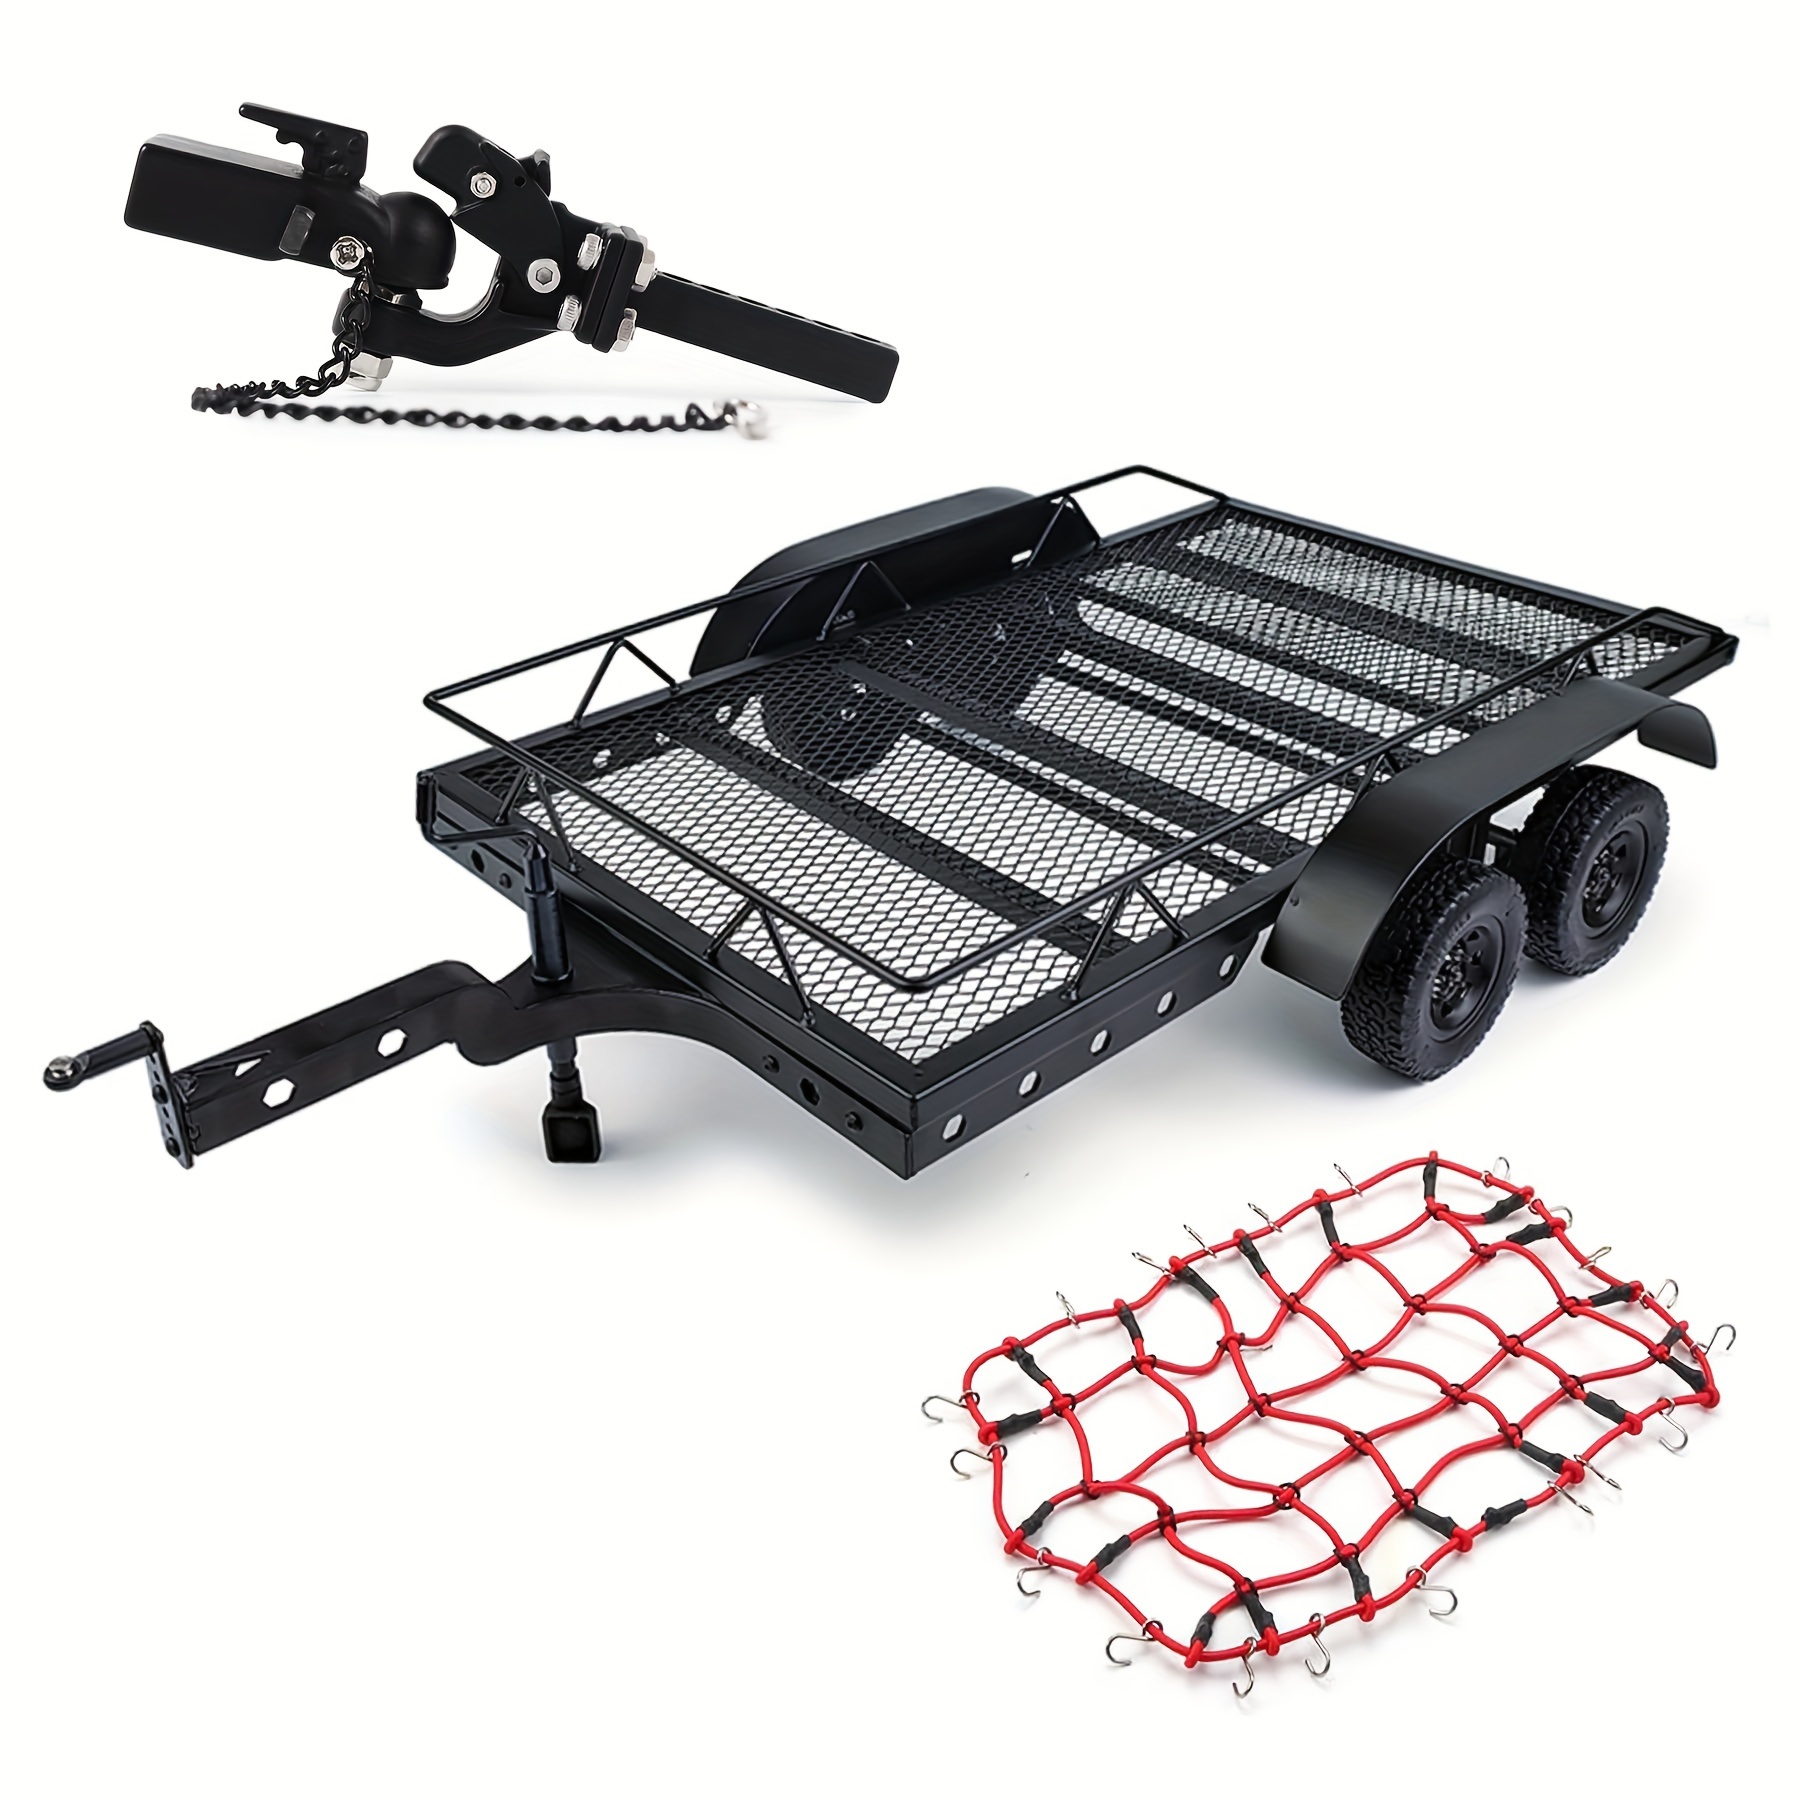 Metal 1/10 Scale RC Trailer For Hauling Behind Cars With Truck Hitch And Receiver Towing Strap Builer Kit $52.49